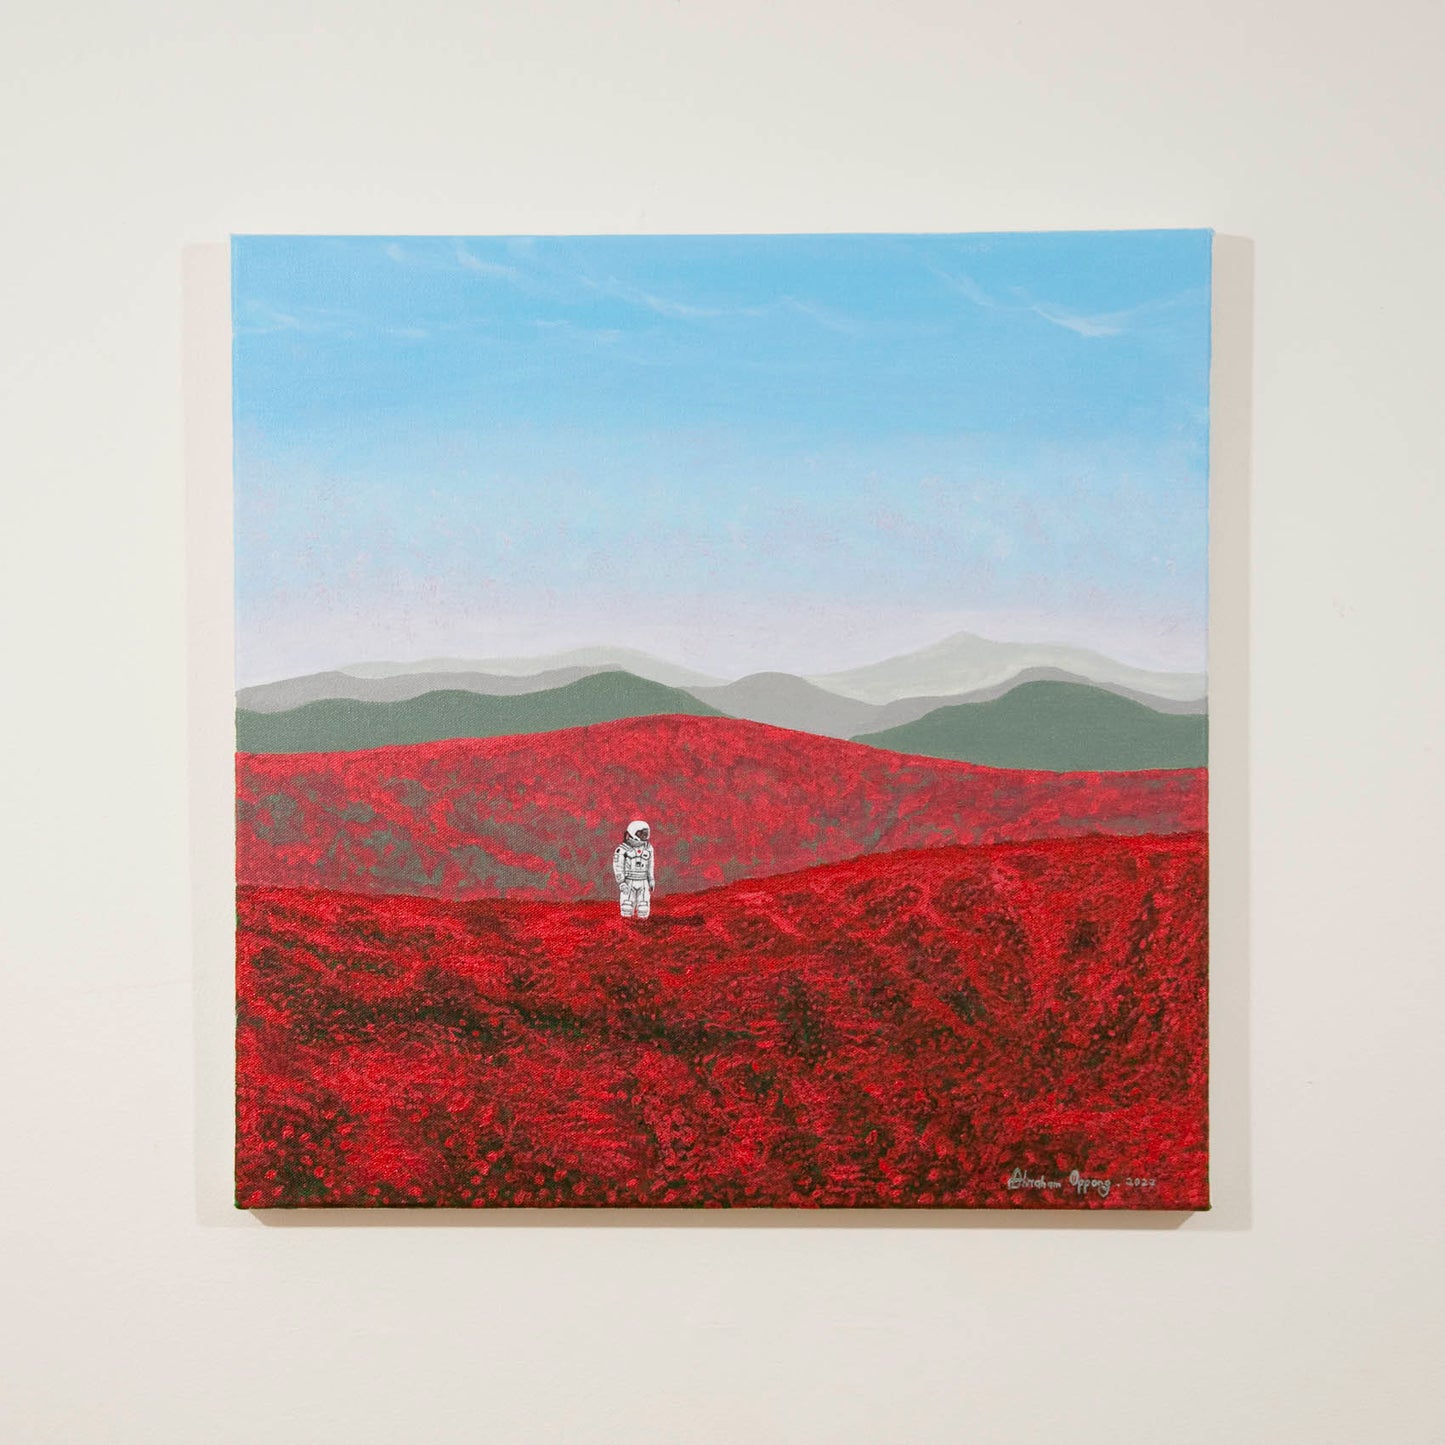 Original semiabstract landscape painting of red fields with an astronaut in white space suit with bluey pink skies and greenish grey hills beyond.